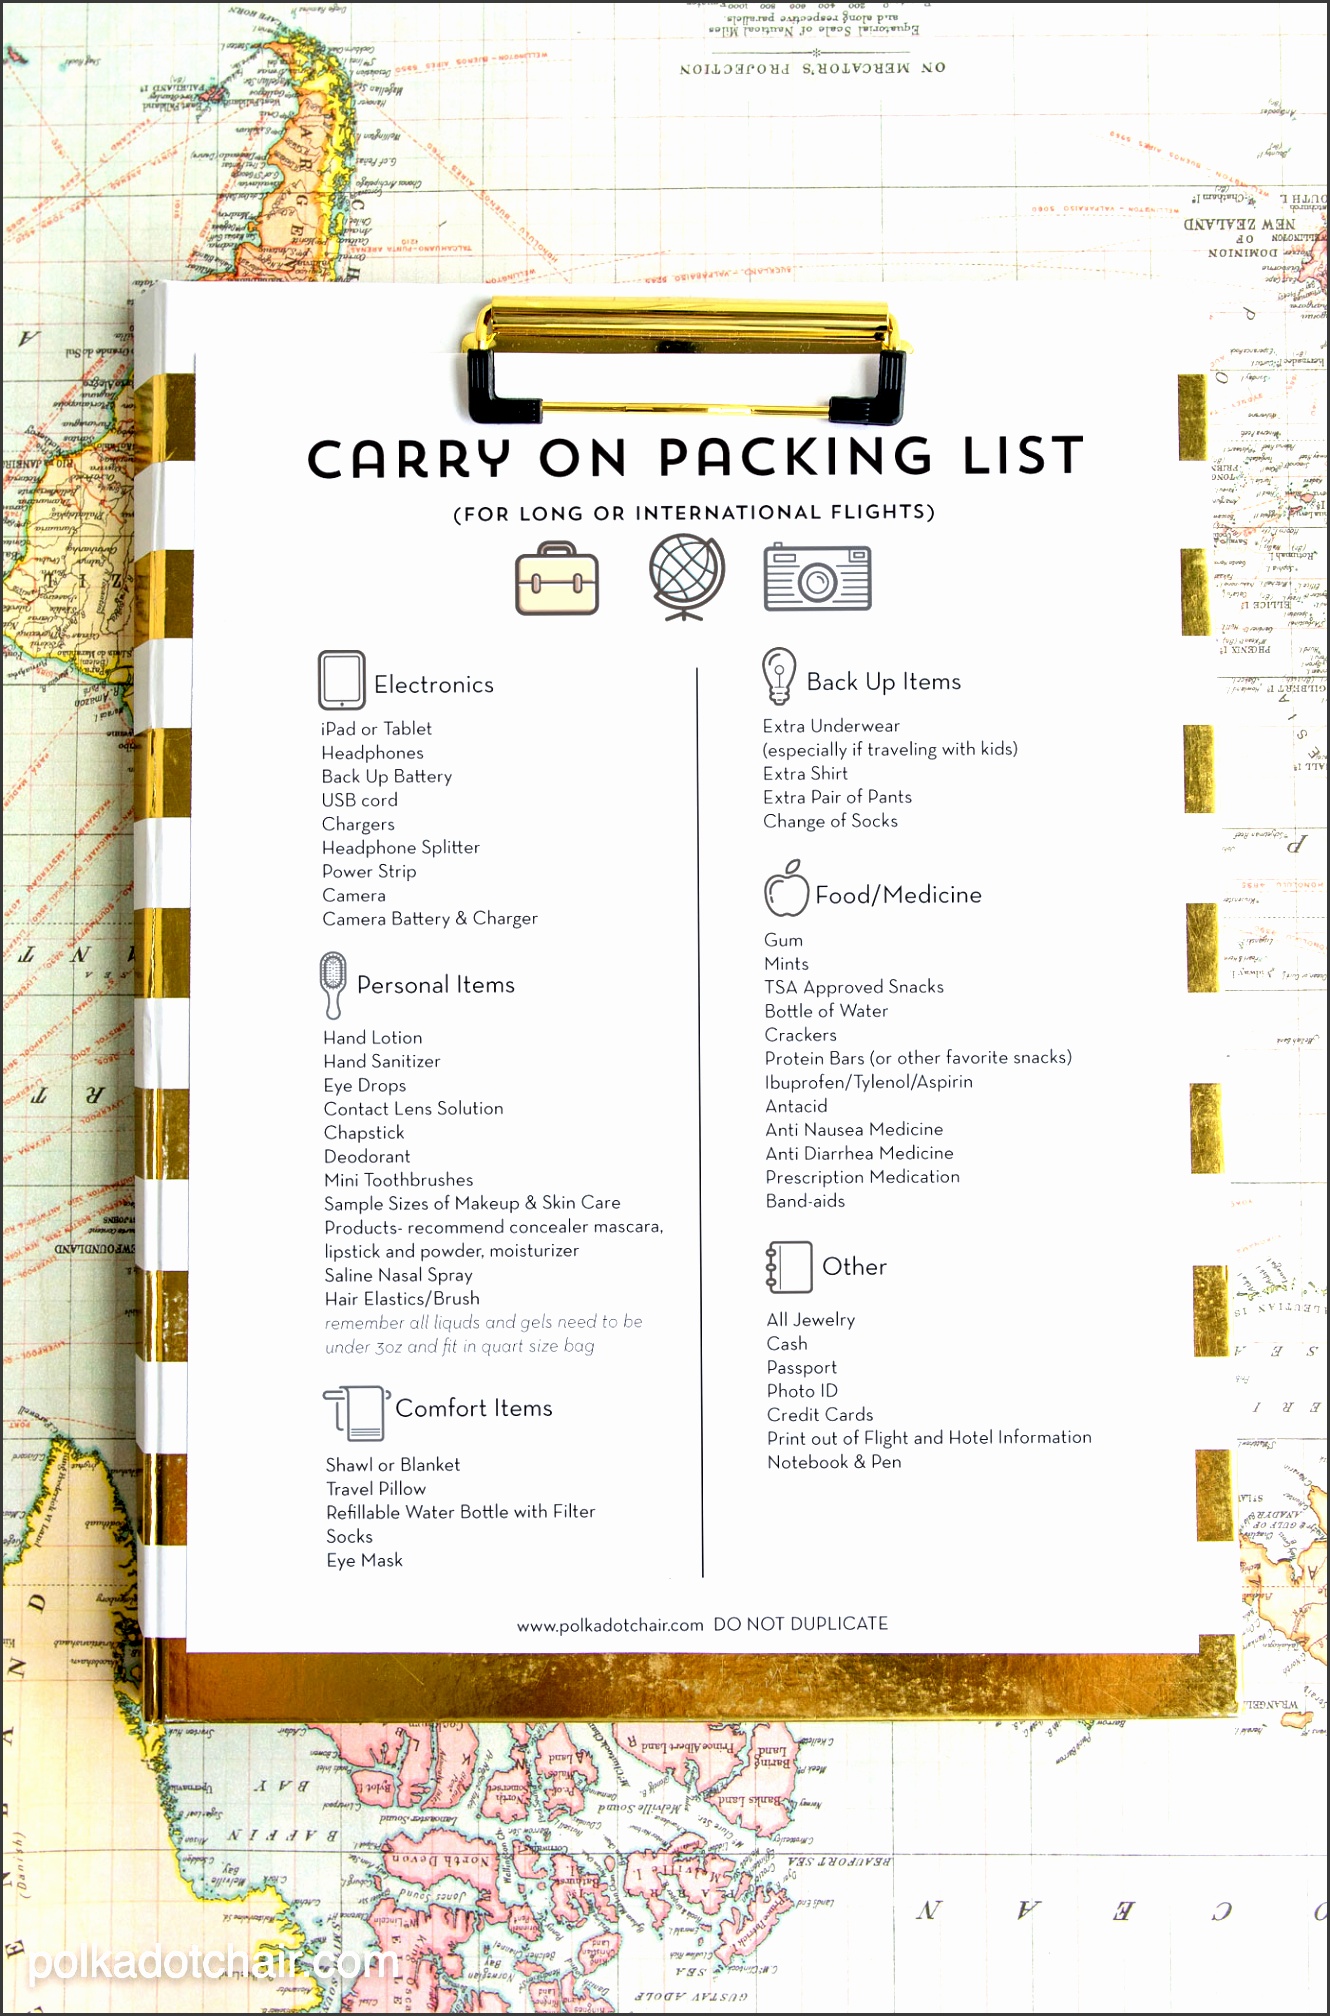 tips for surviving long airline flights along with a free printable airplane carry on packing